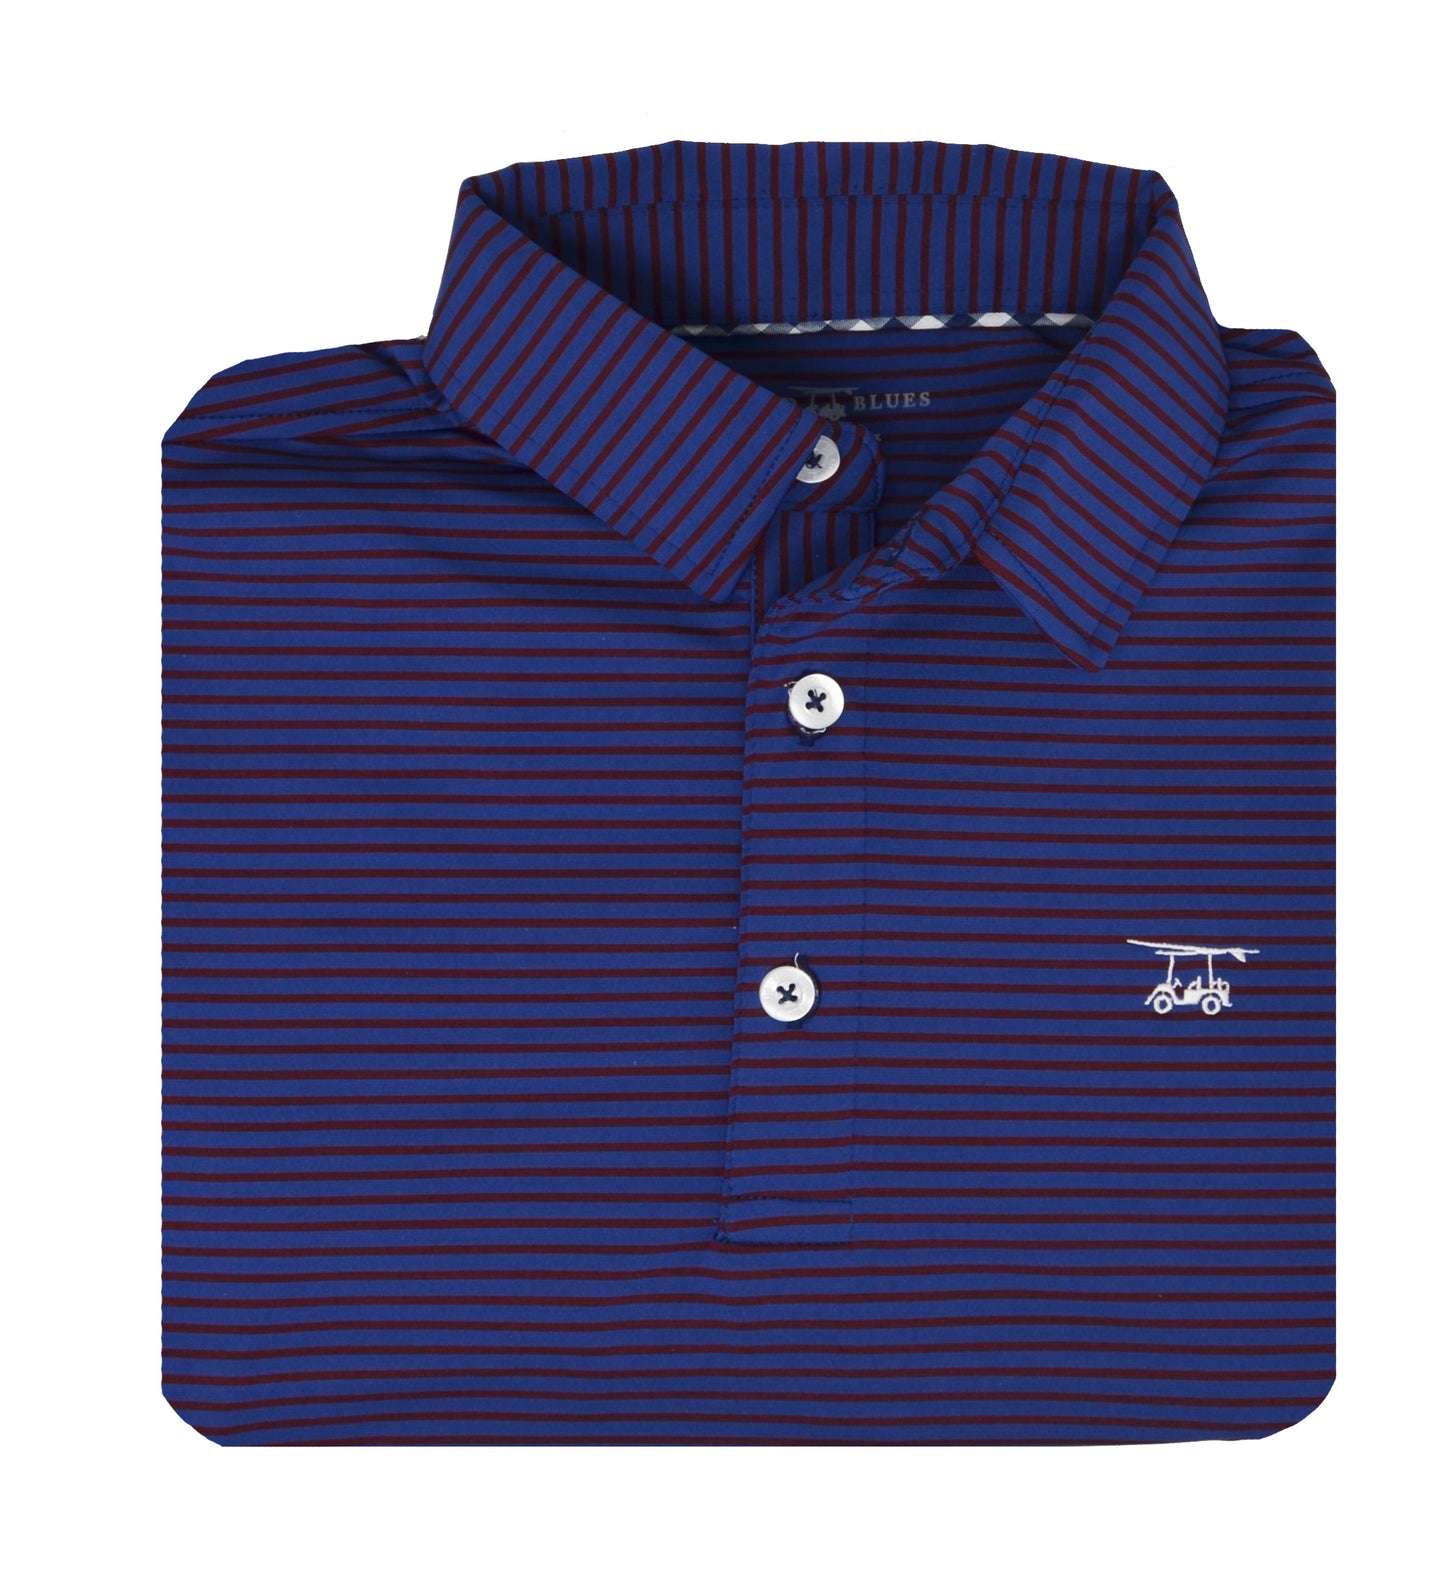 Limited Edition Polo - Navy / Maroon Stripes